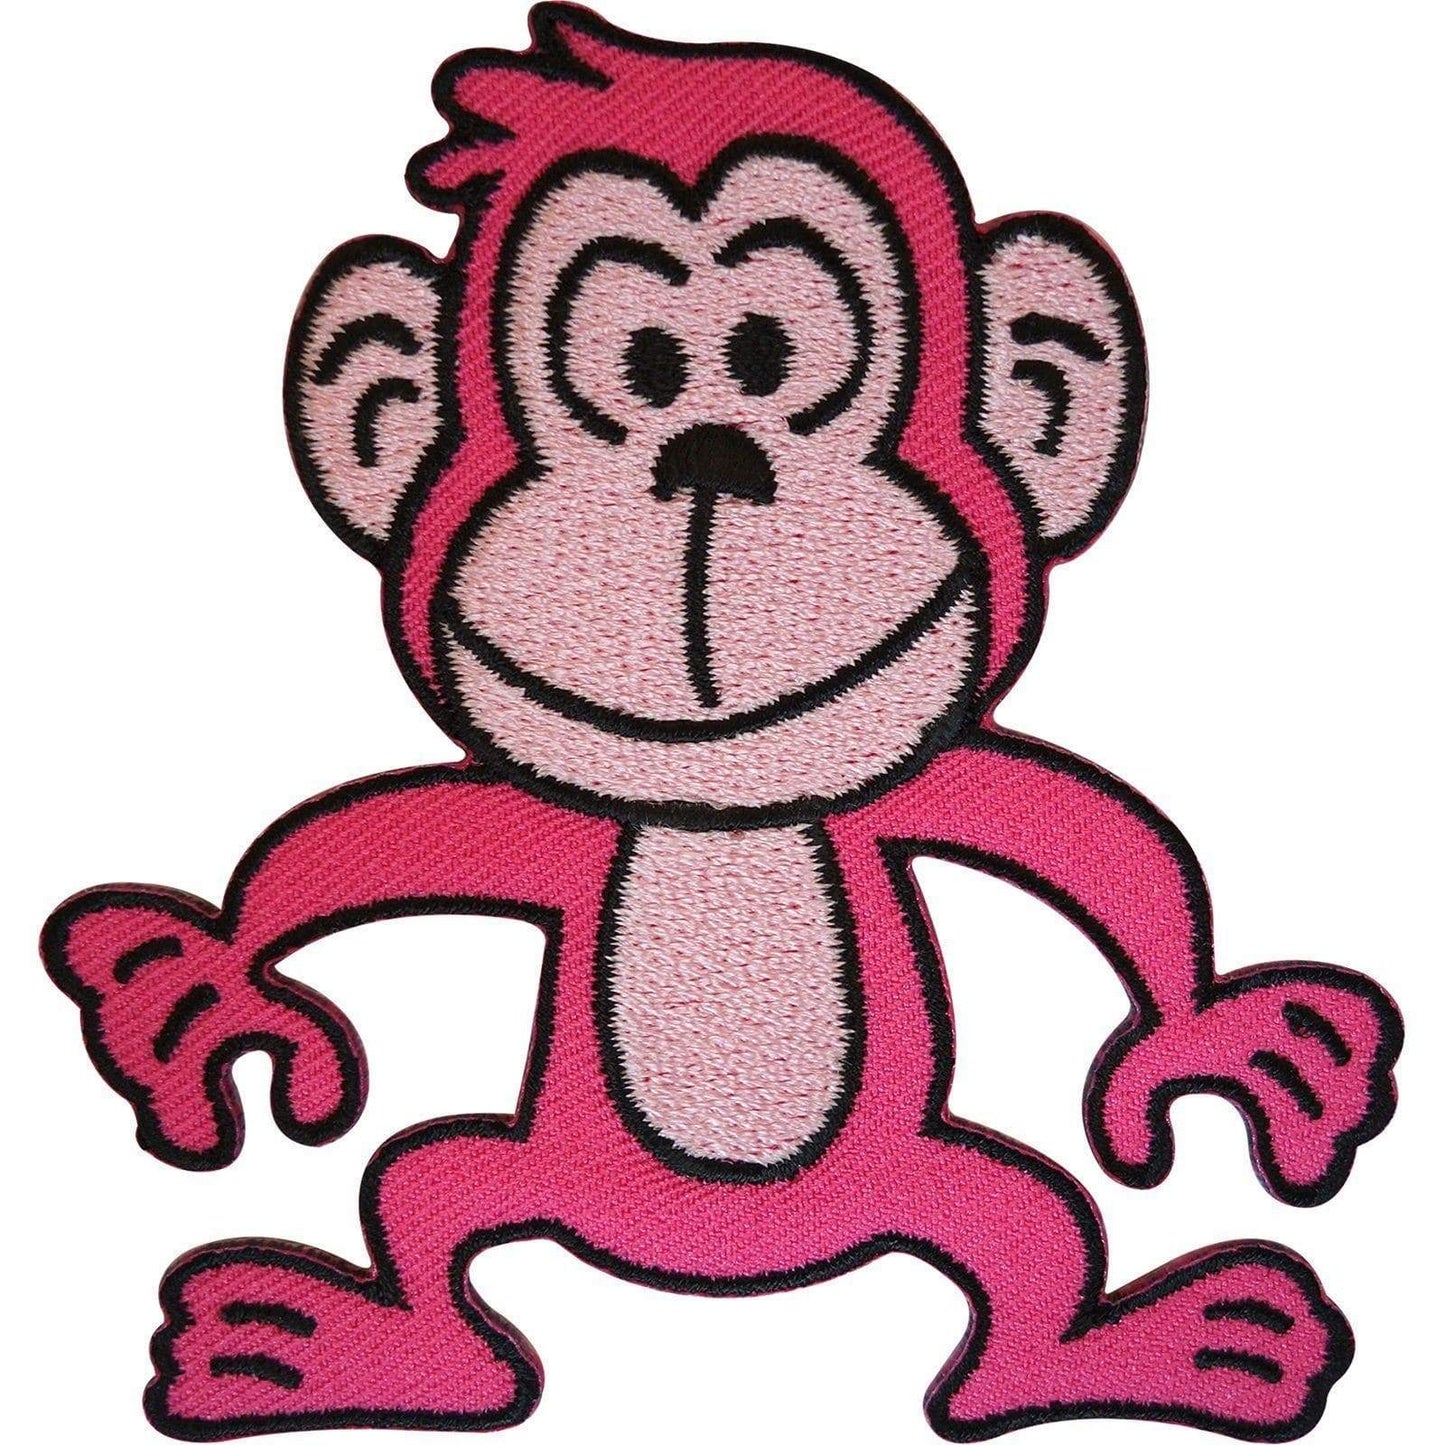 Embroidered Pink Monkey Iron On Badge Sew On Patch Chimp Ape Embroidery Applique